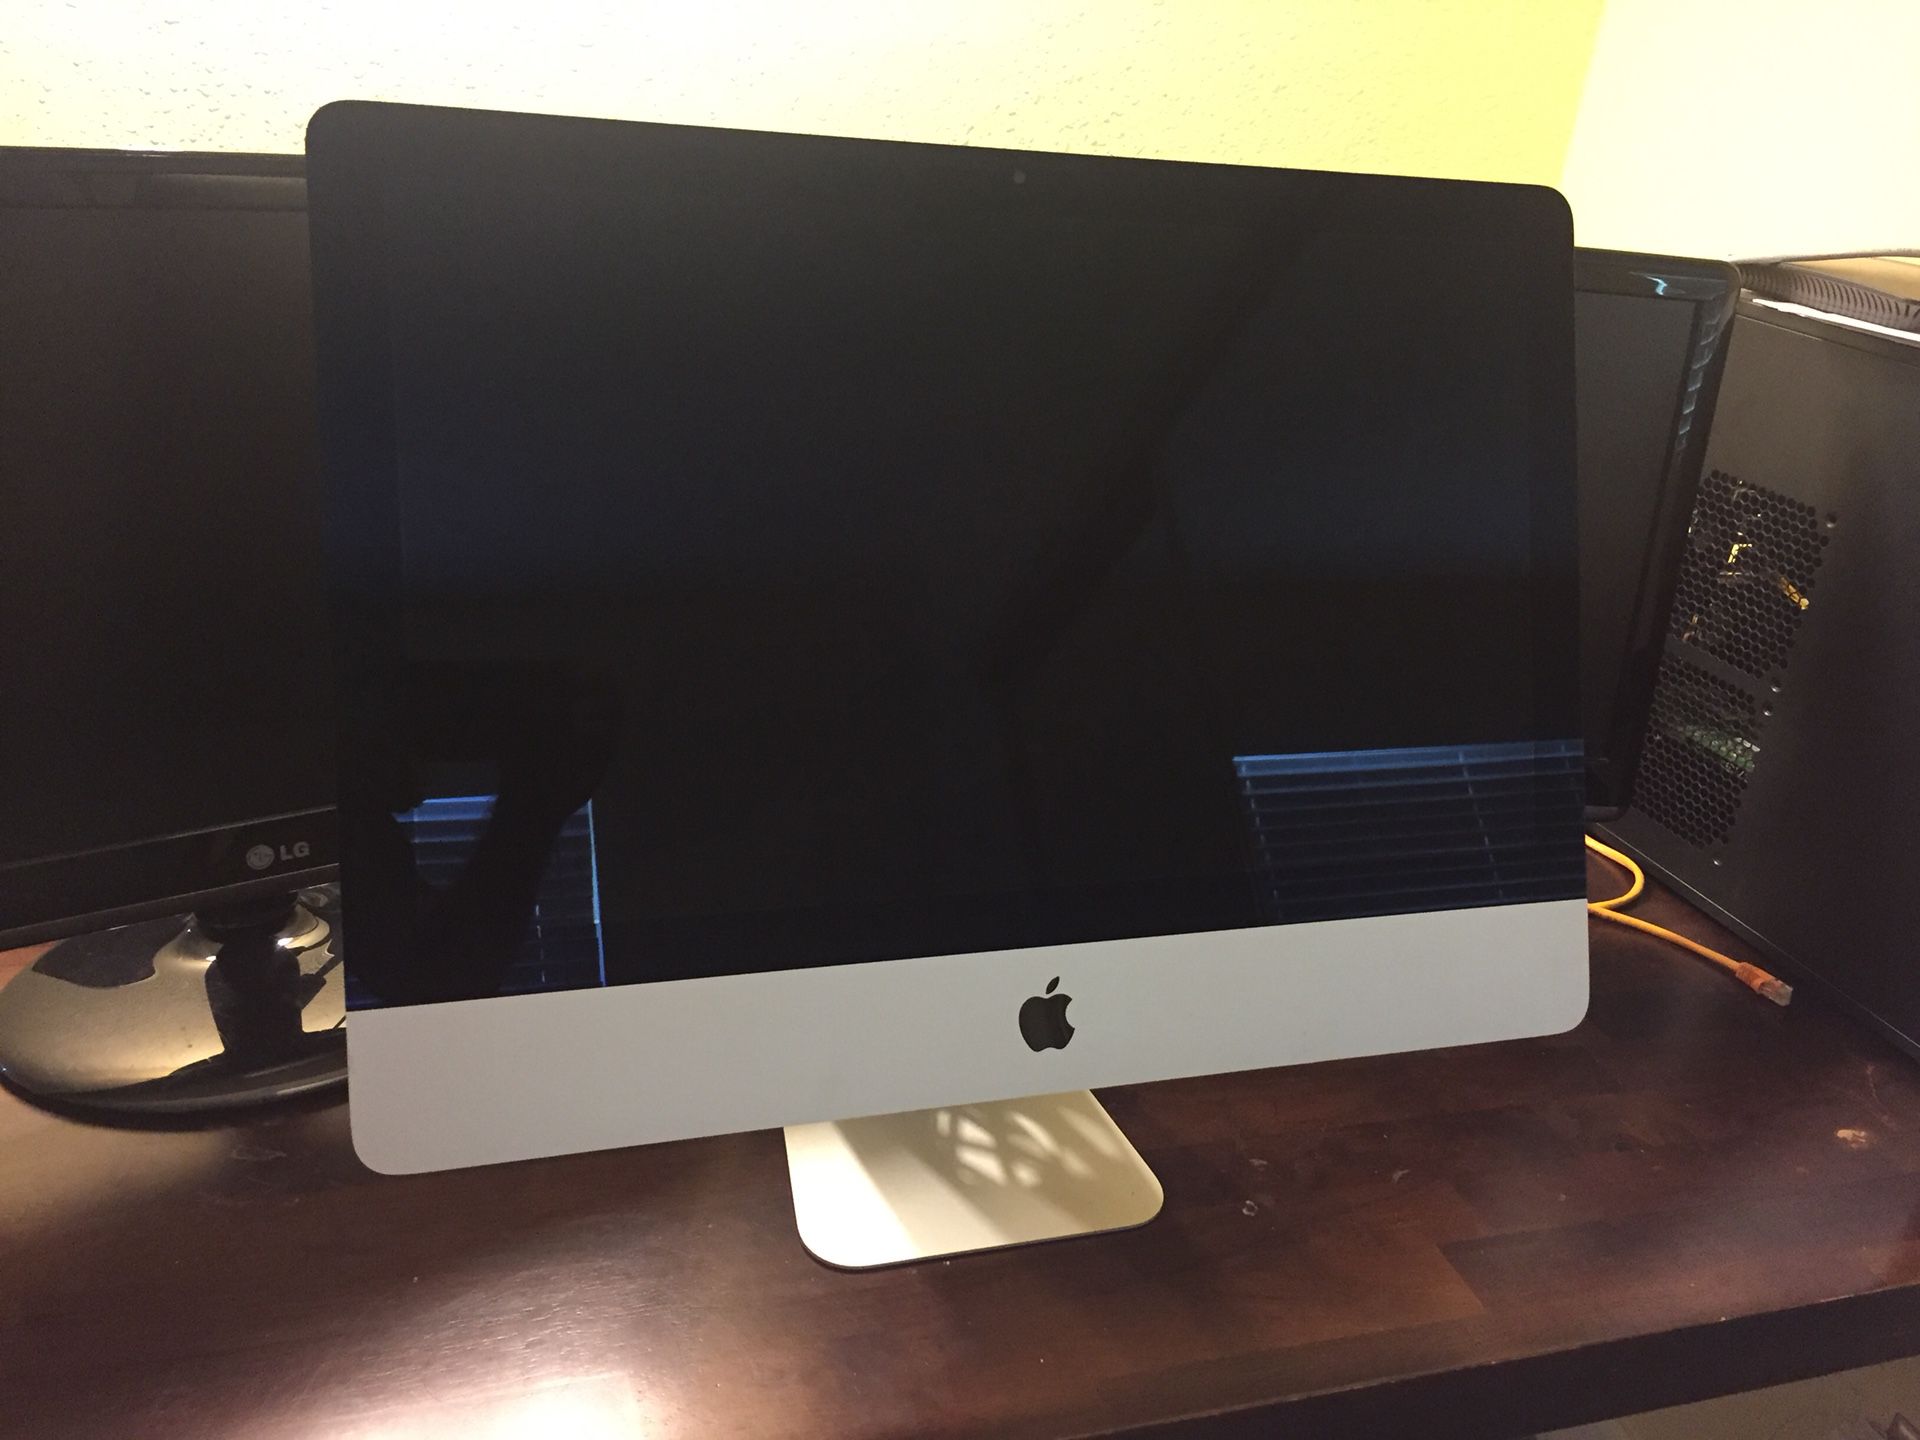 Imac 21.5” late 2015 for sale!!